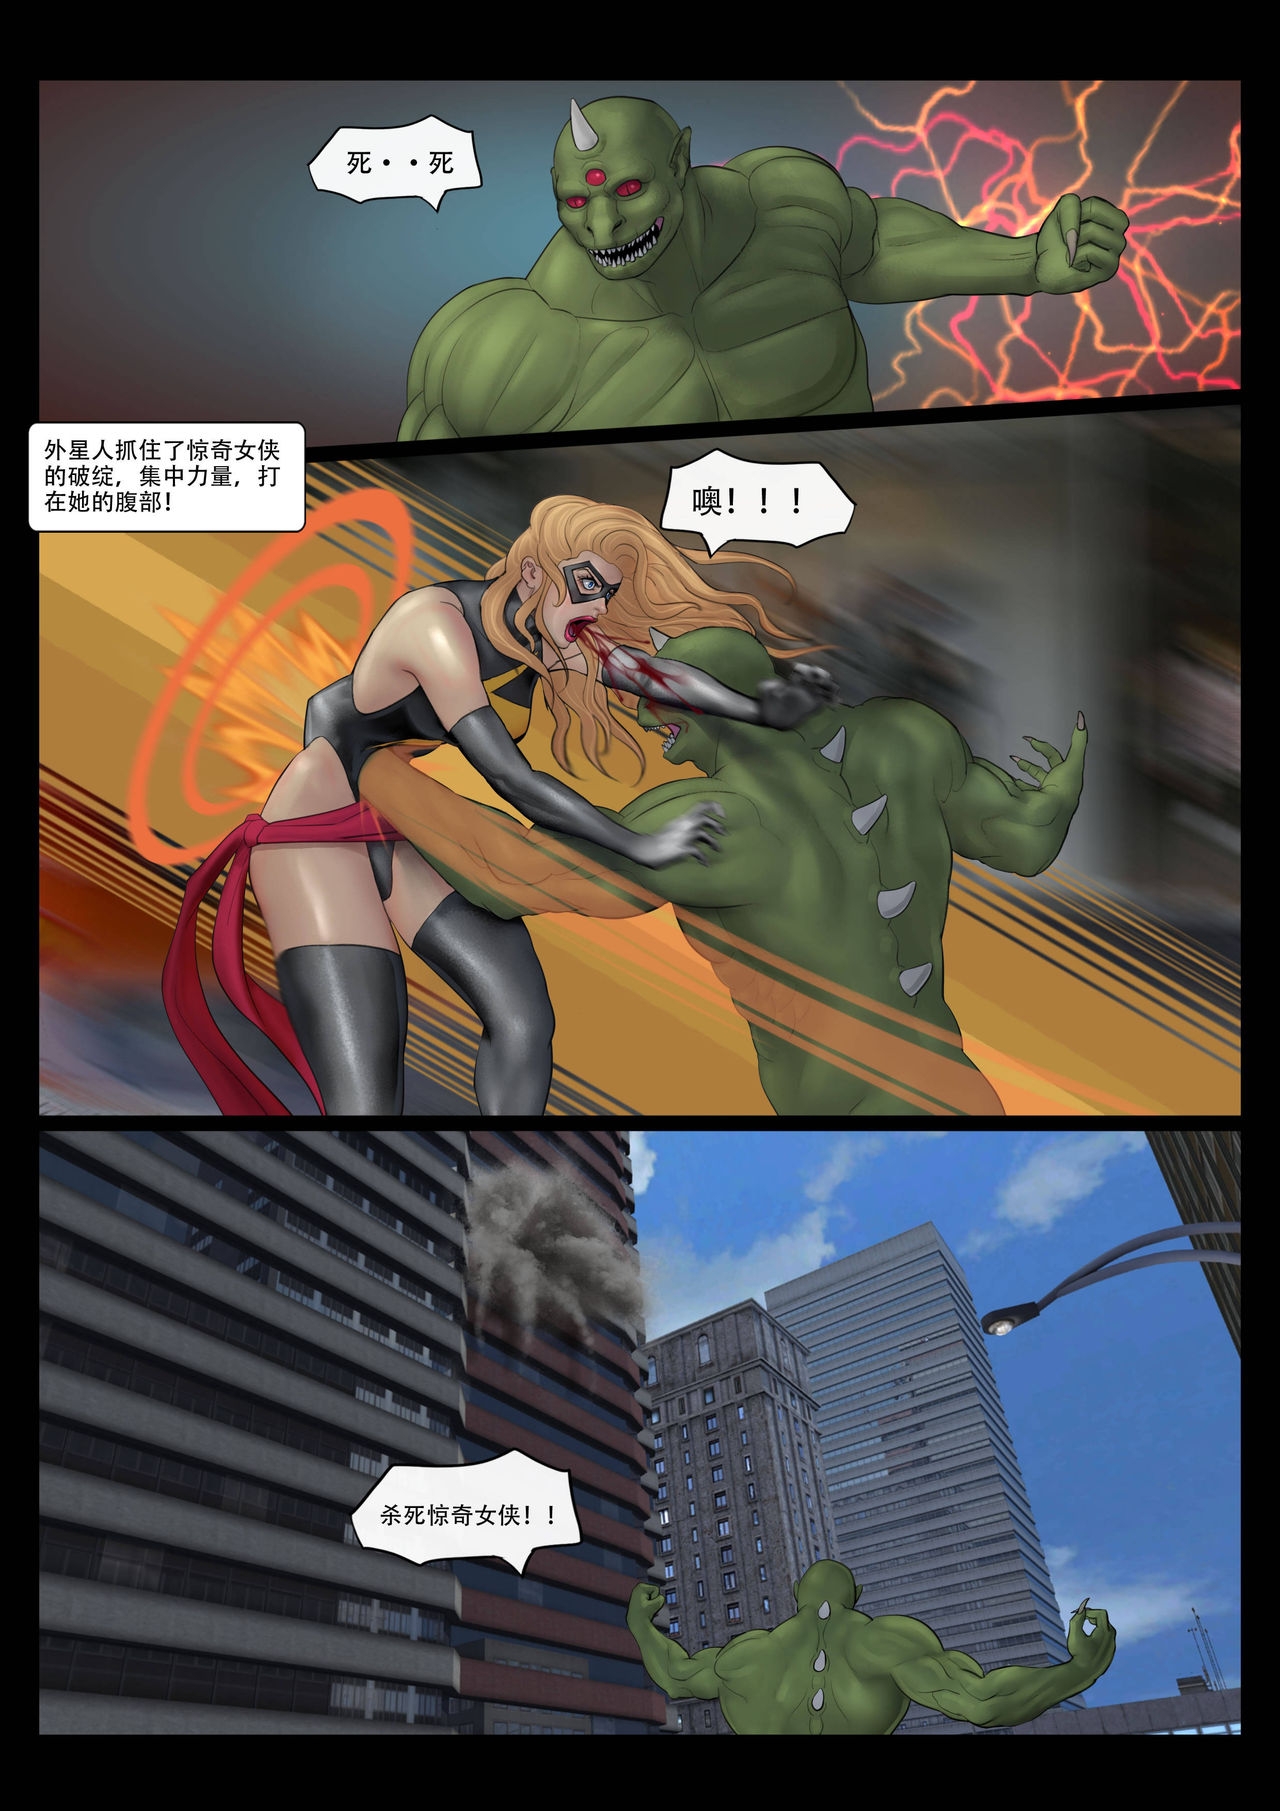 The Nightmare of Avengers Chapter 0 8